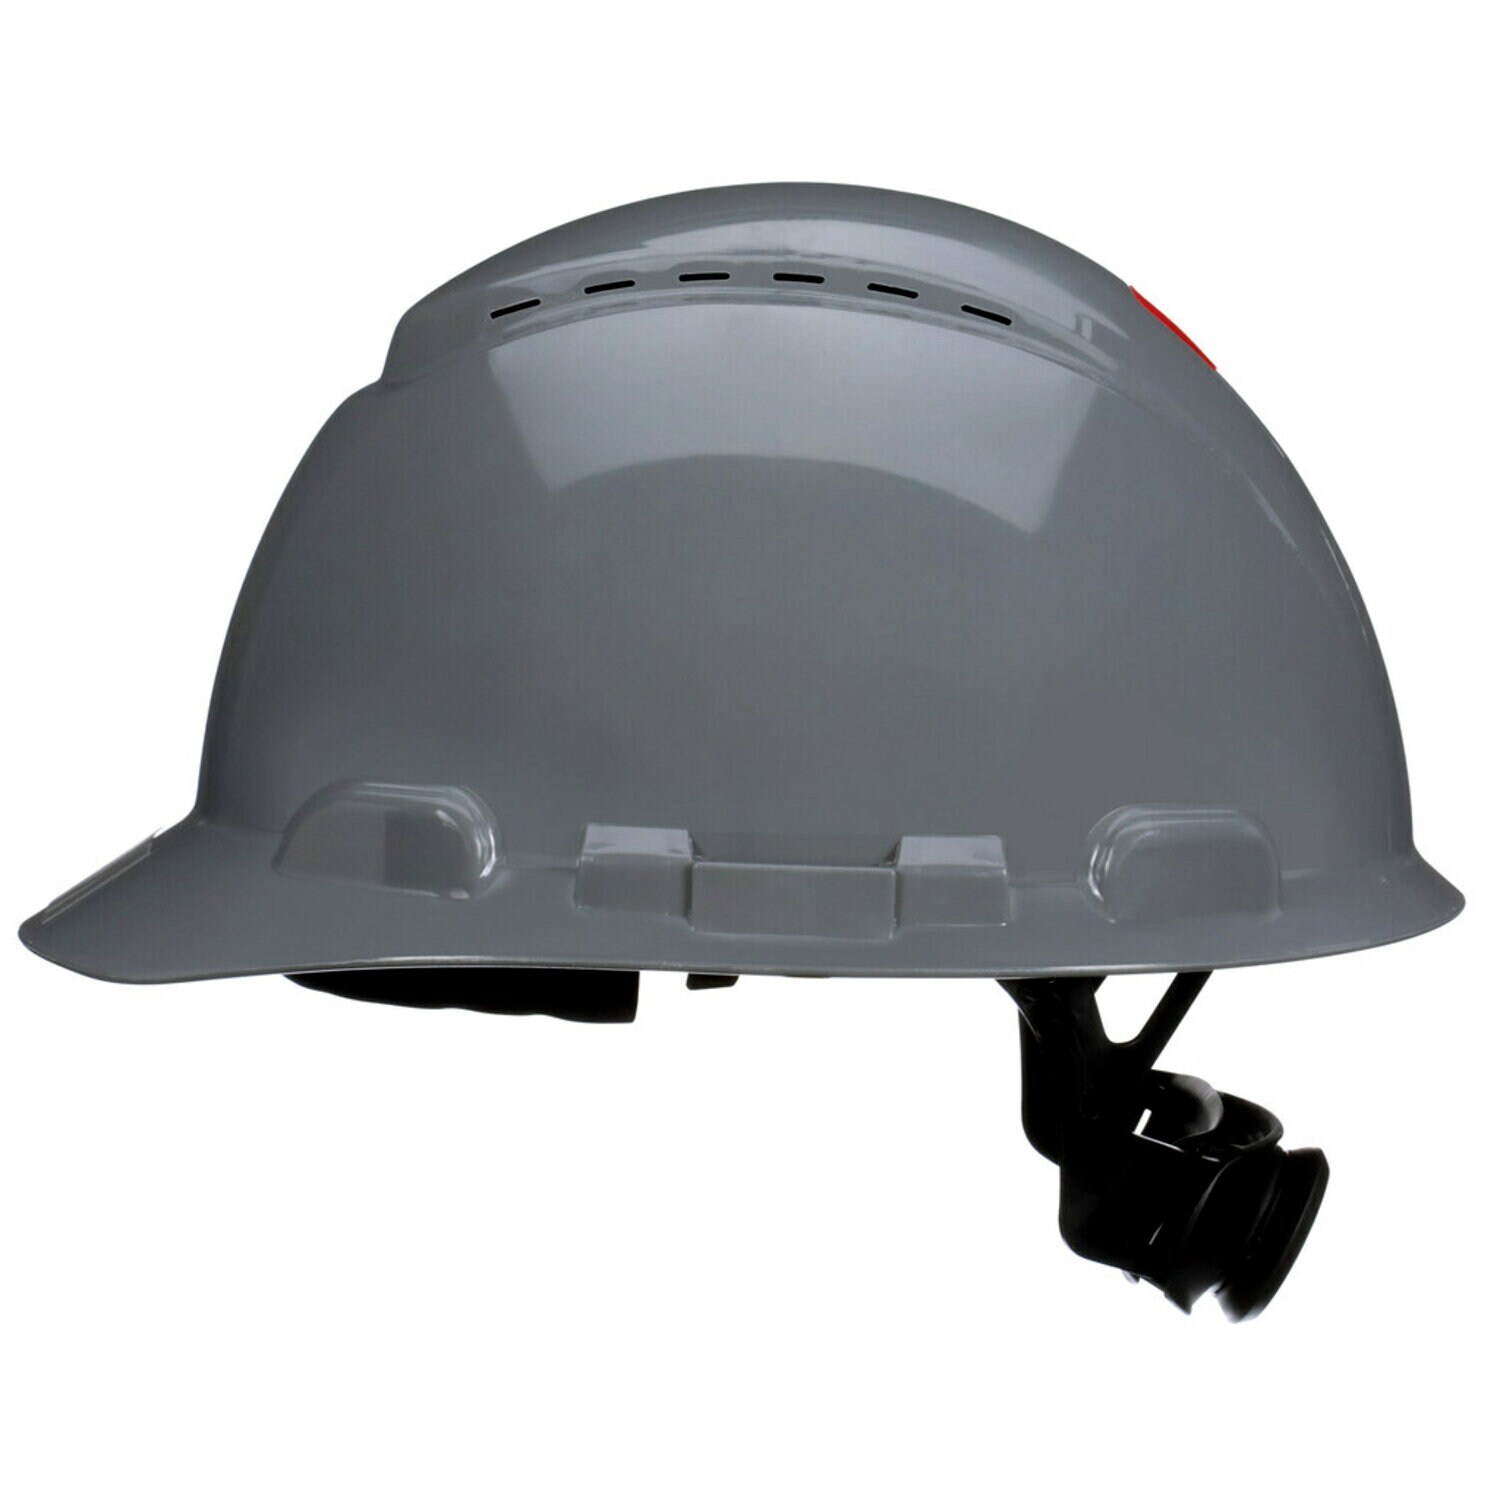 7100239990 - 3M SecureFit Hard Hat H-708SFV-UV, Grey, Vented, 4-Point Pressure Diffusion Ratchet Suspension, with UVicator, 20 ea/Case